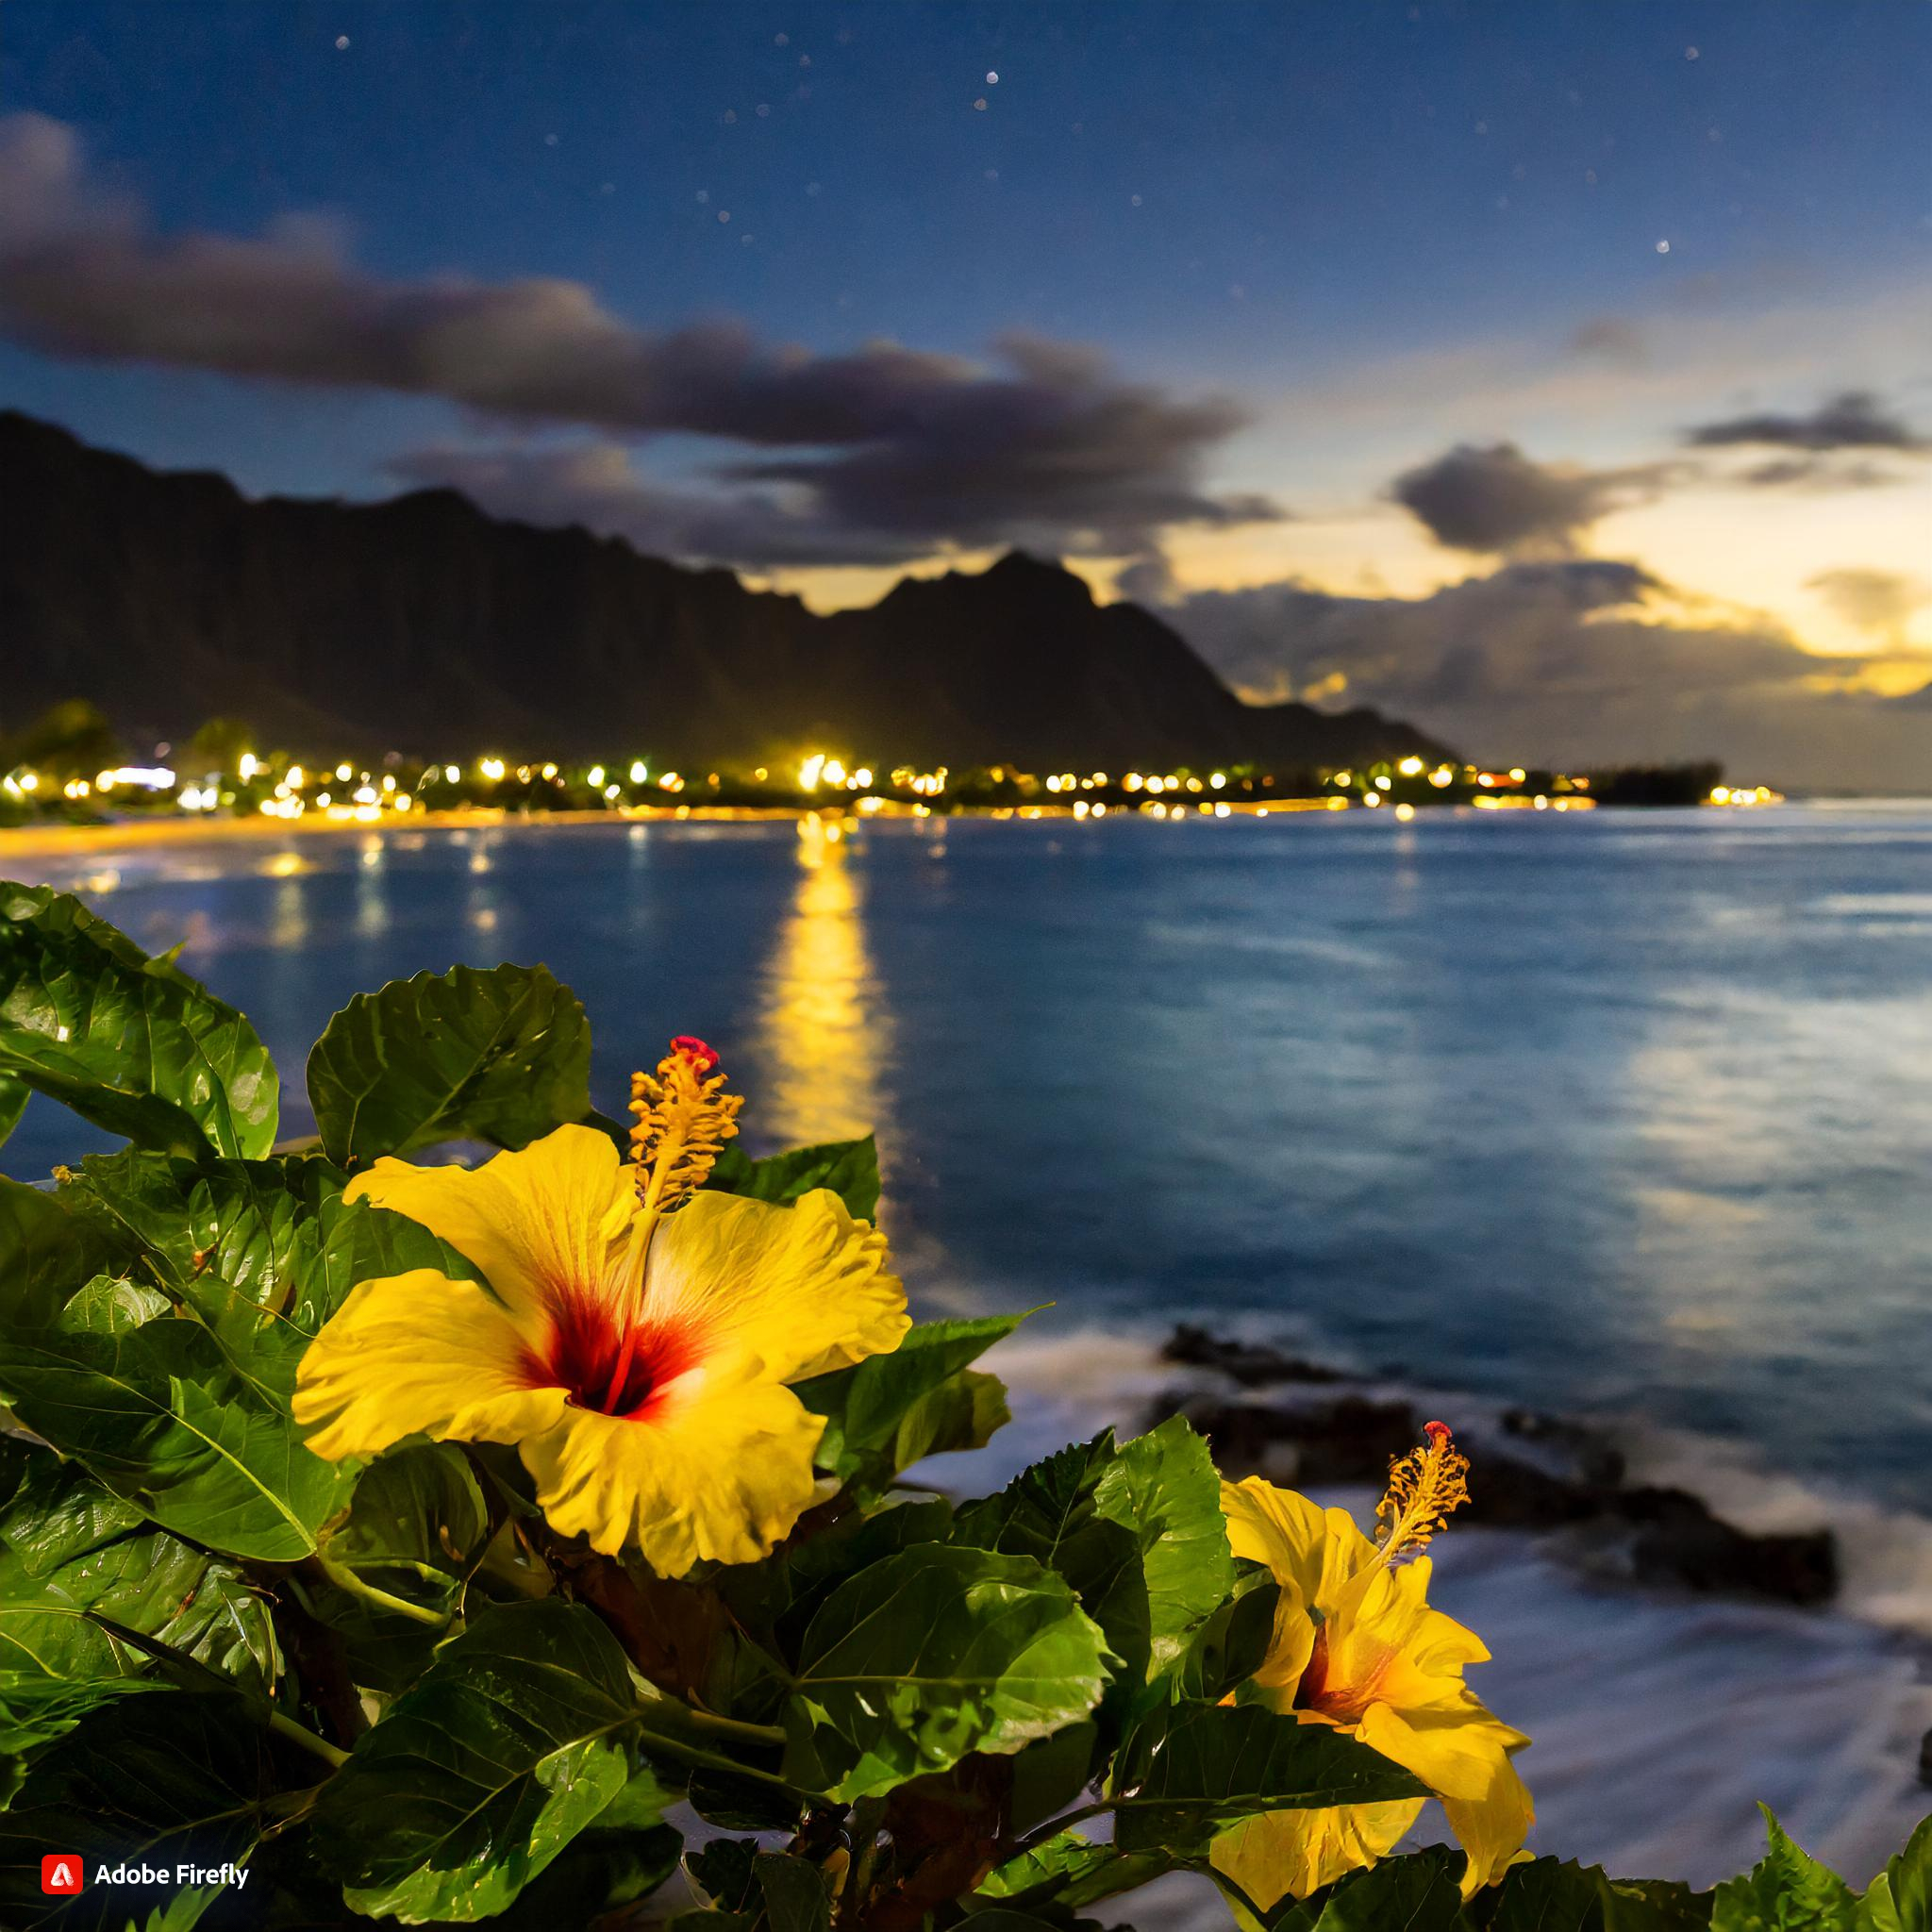 Firefly Hawaii from a scenic view, with Yellow hibiscus flowers, nighttime but beautifully lit, beach